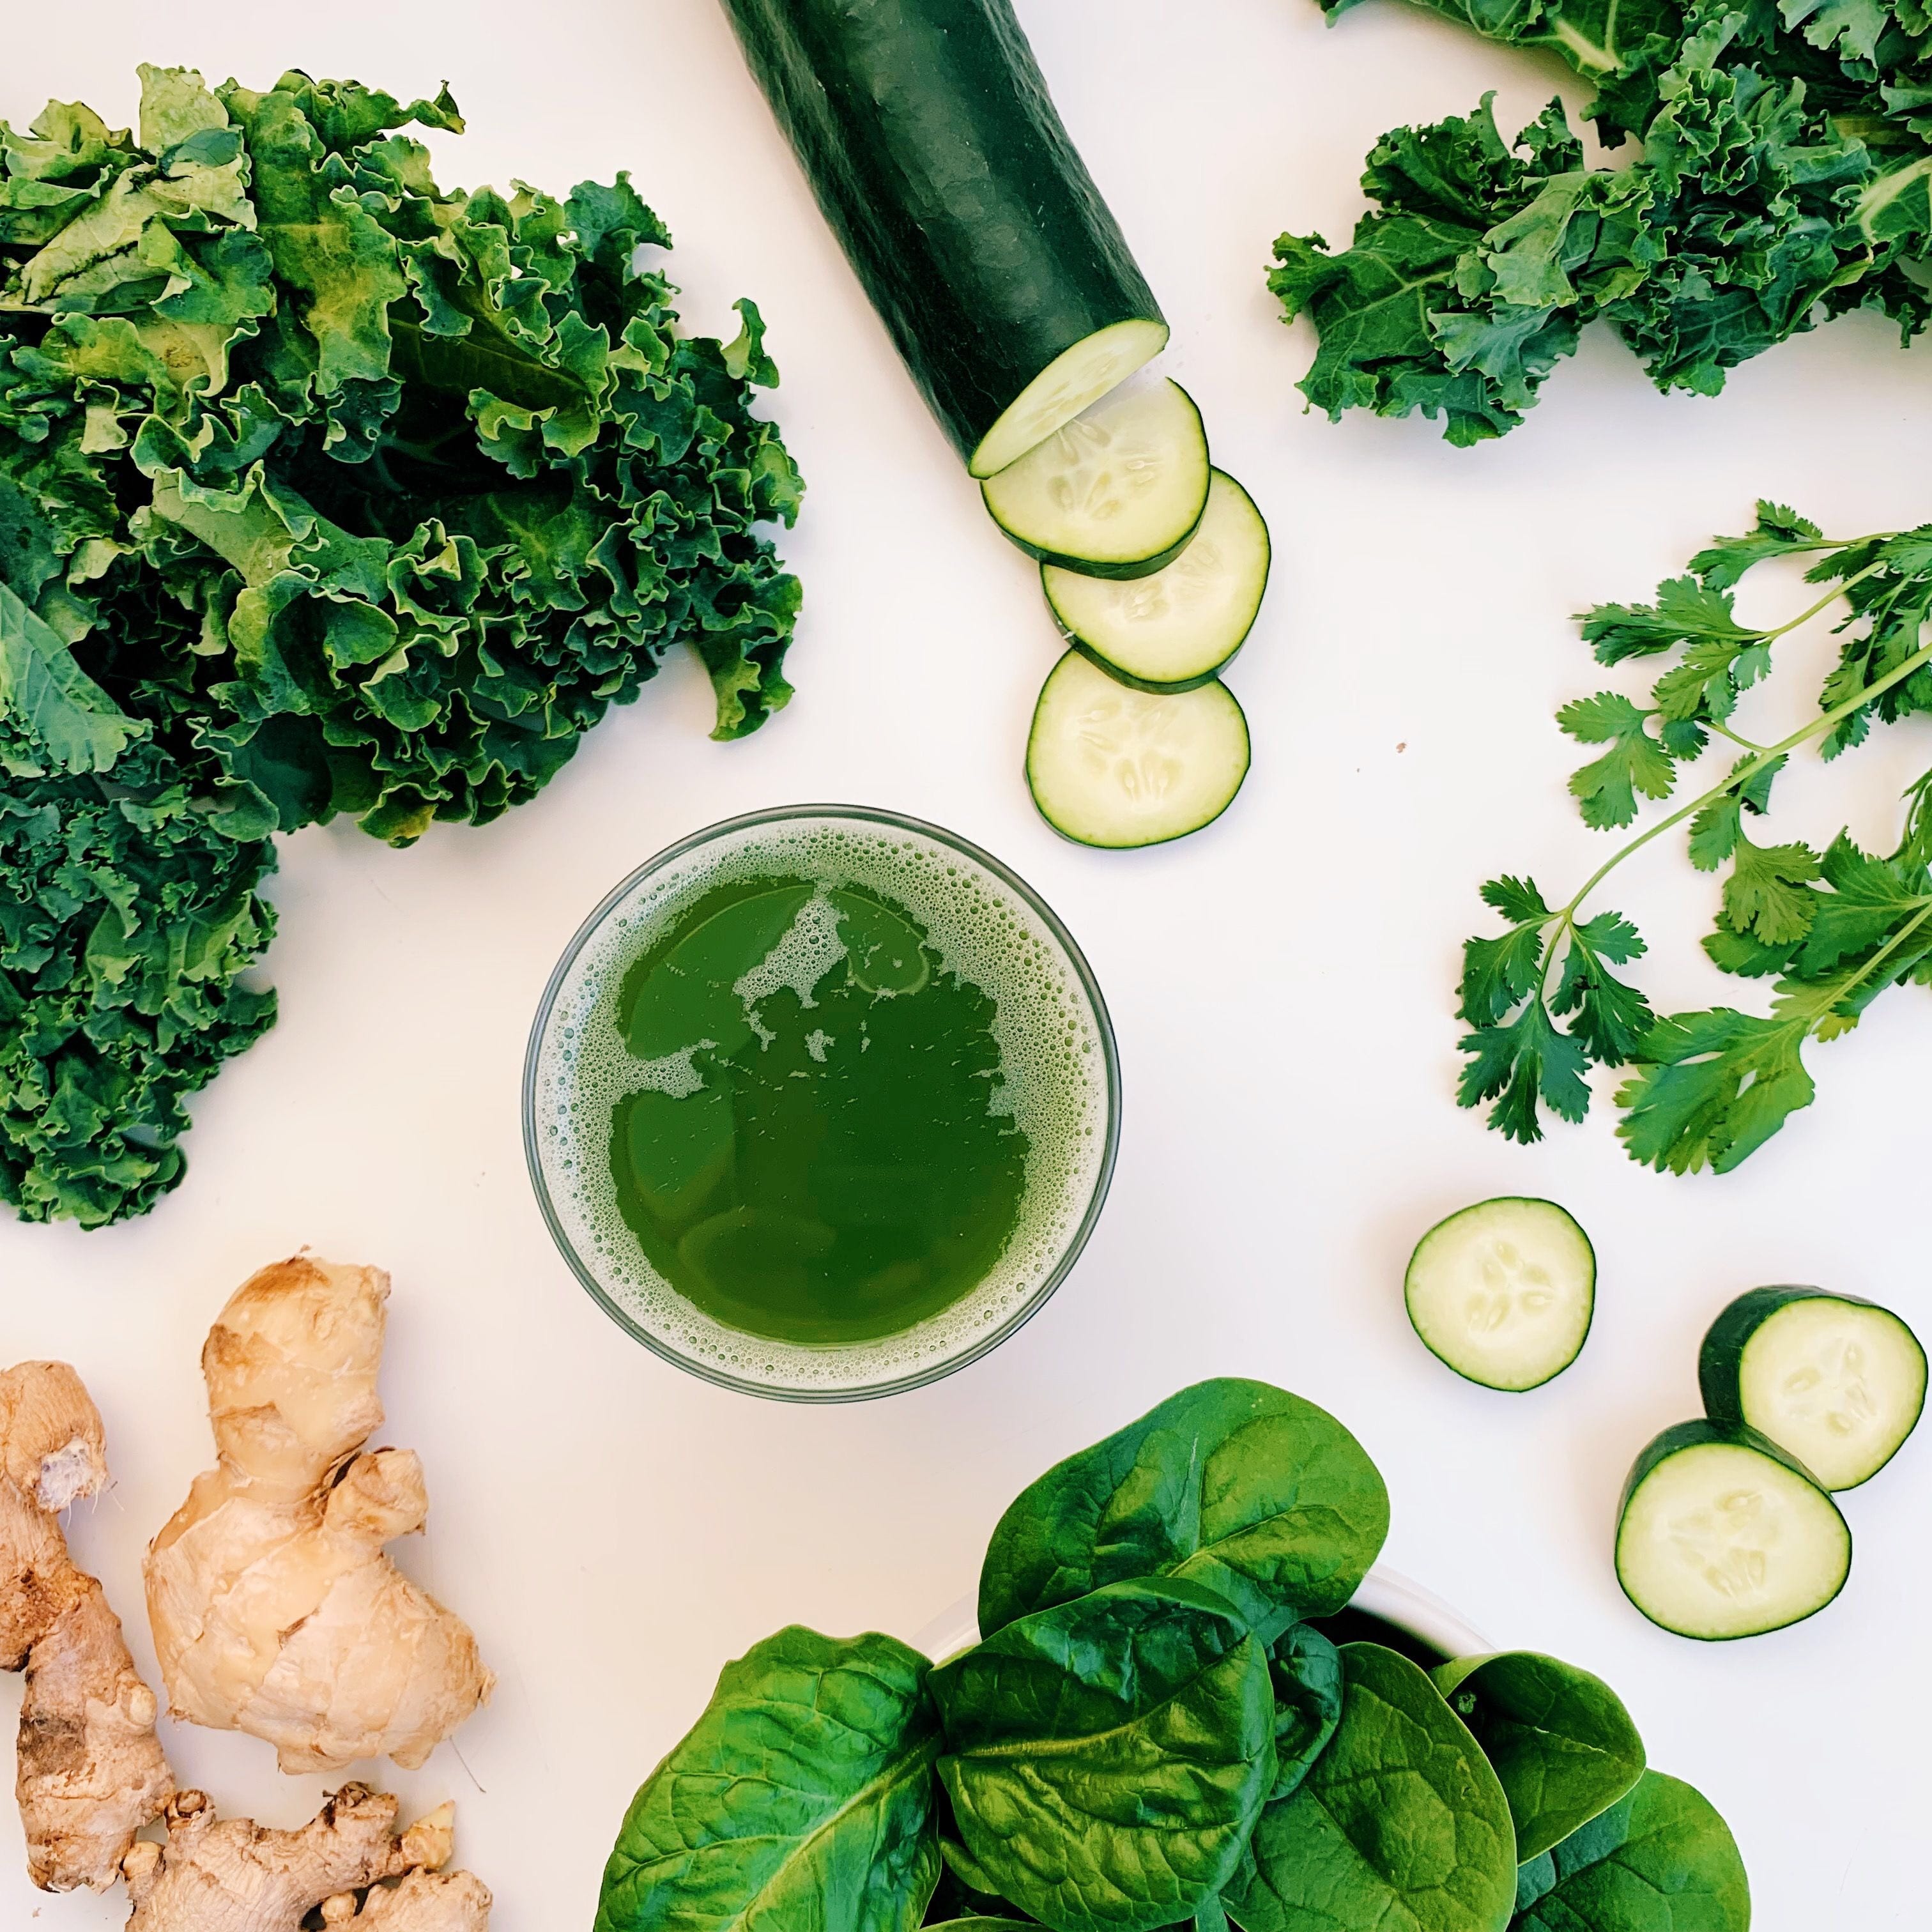 ingredients for healthy green juice that is good for you